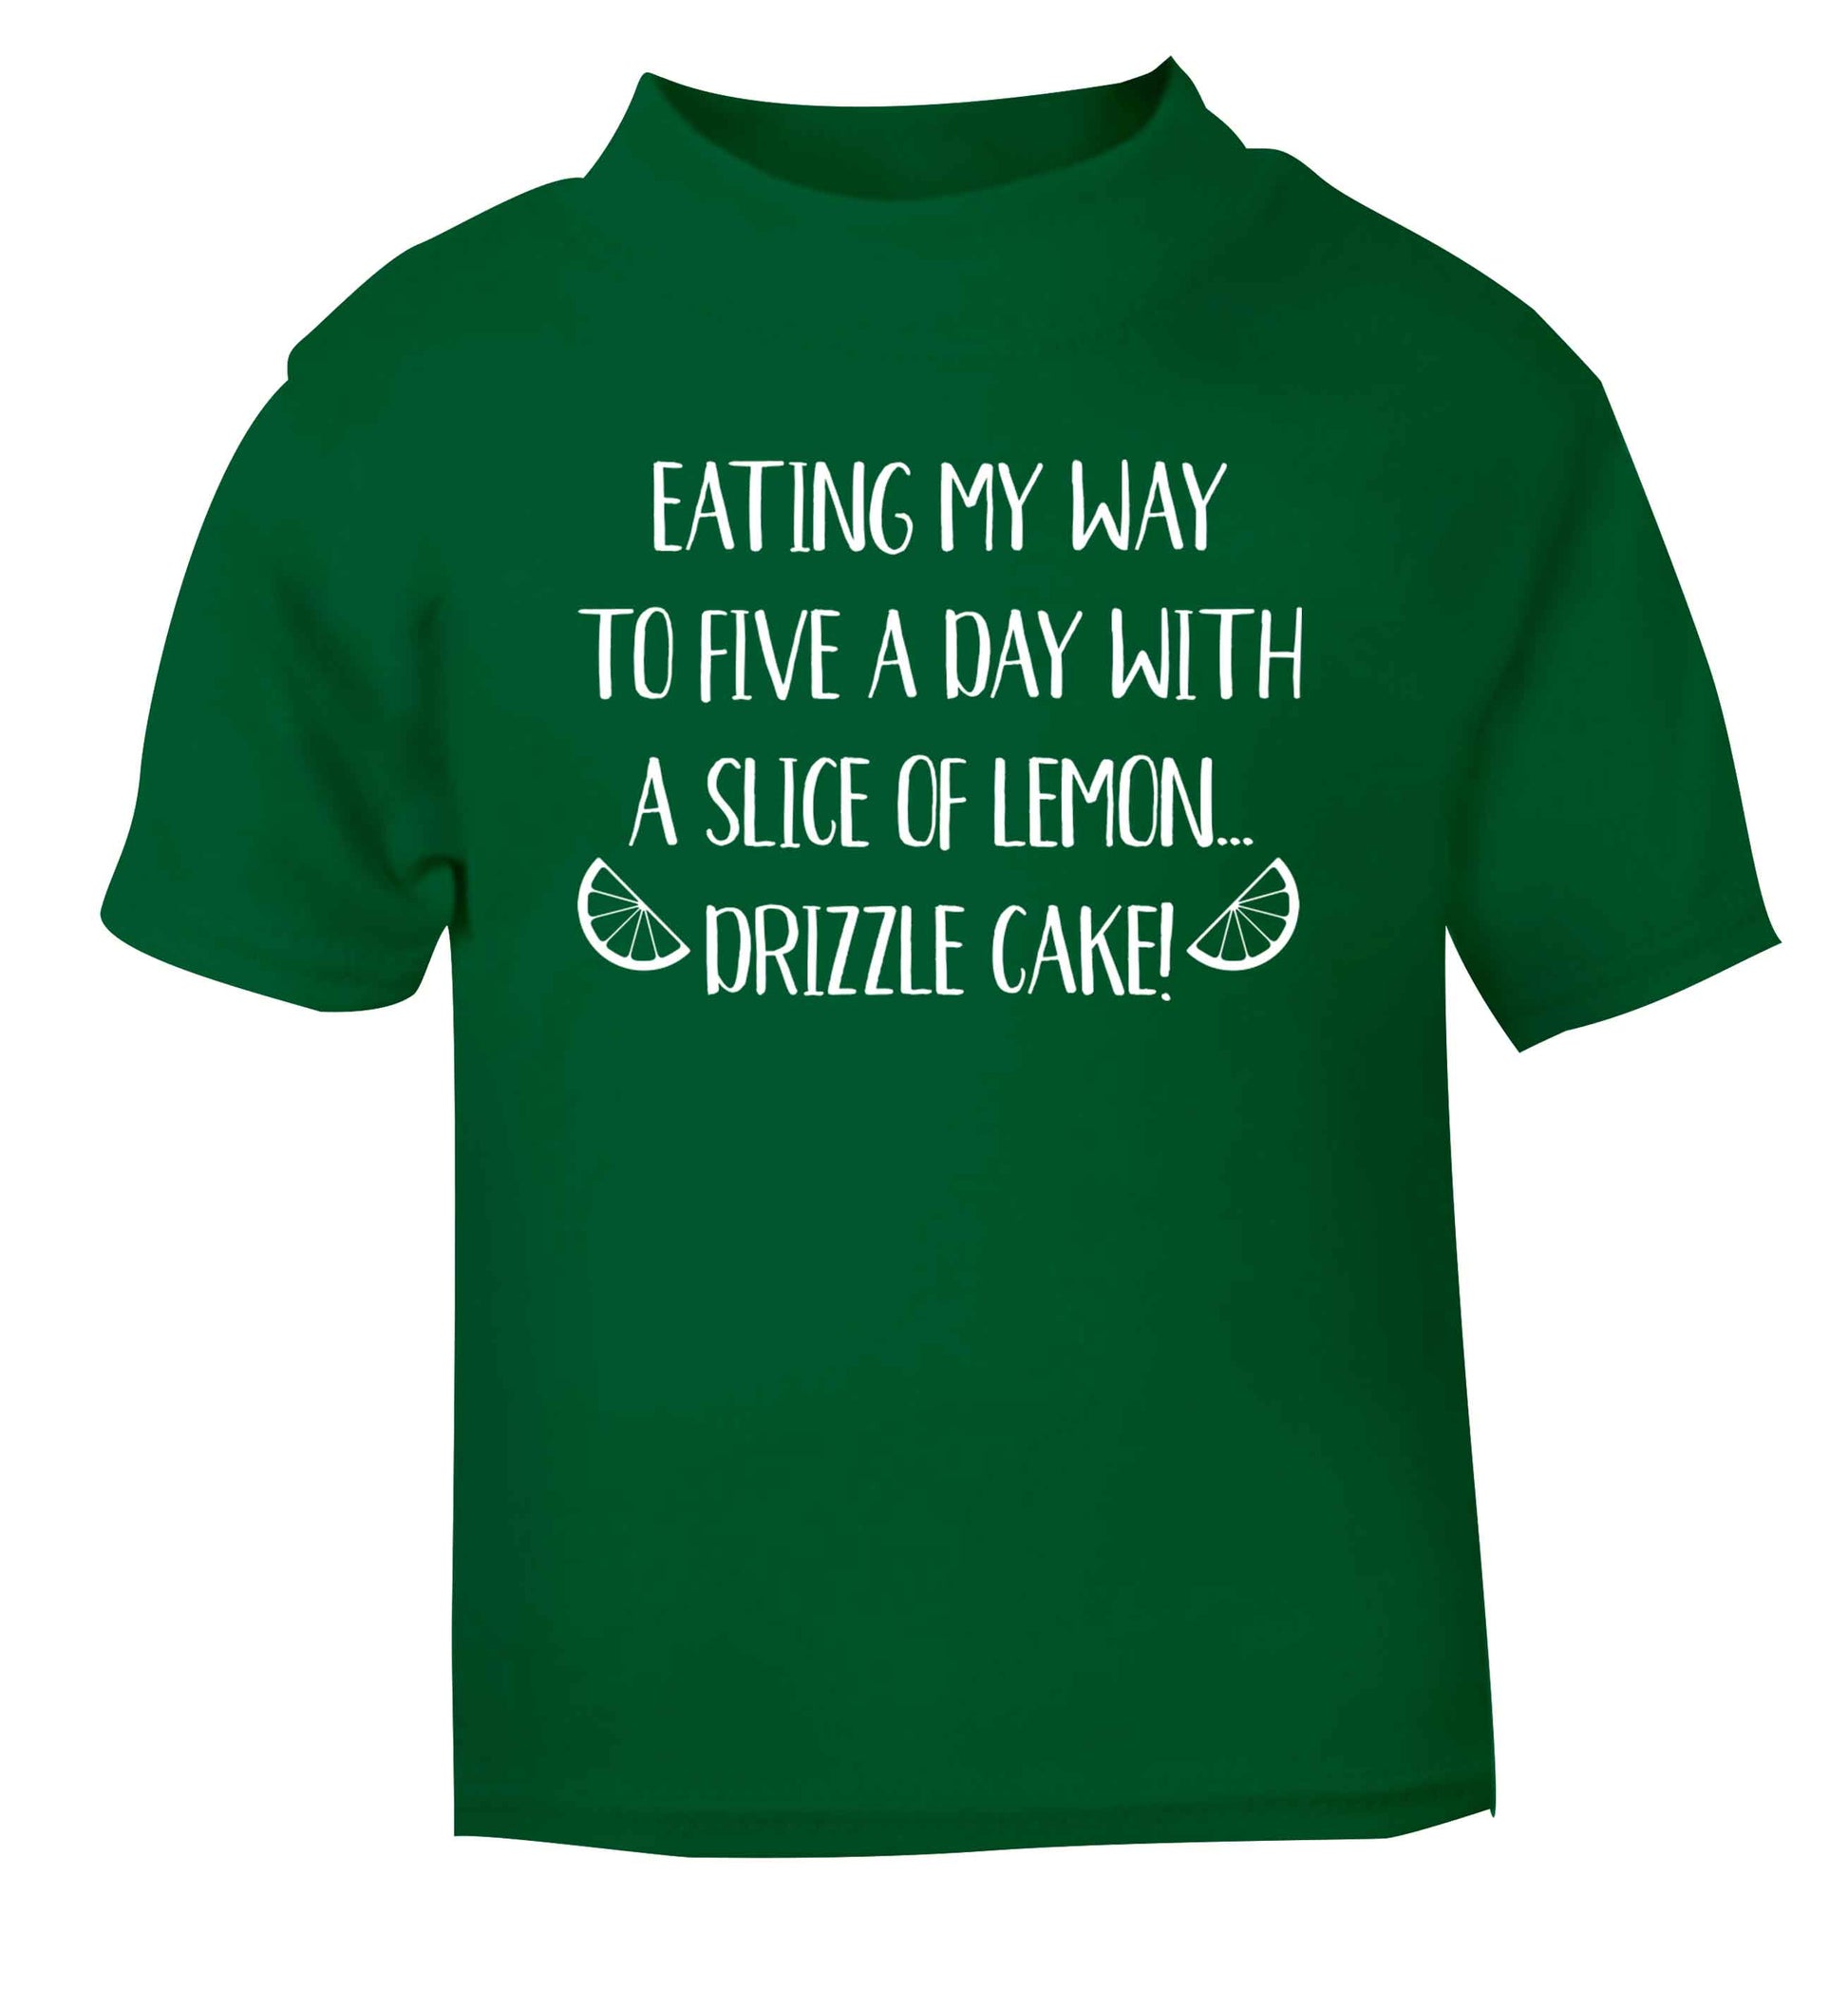 Eating my way to five a day with a slice of lemon drizzle cake day green Baby Toddler Tshirt 2 Years